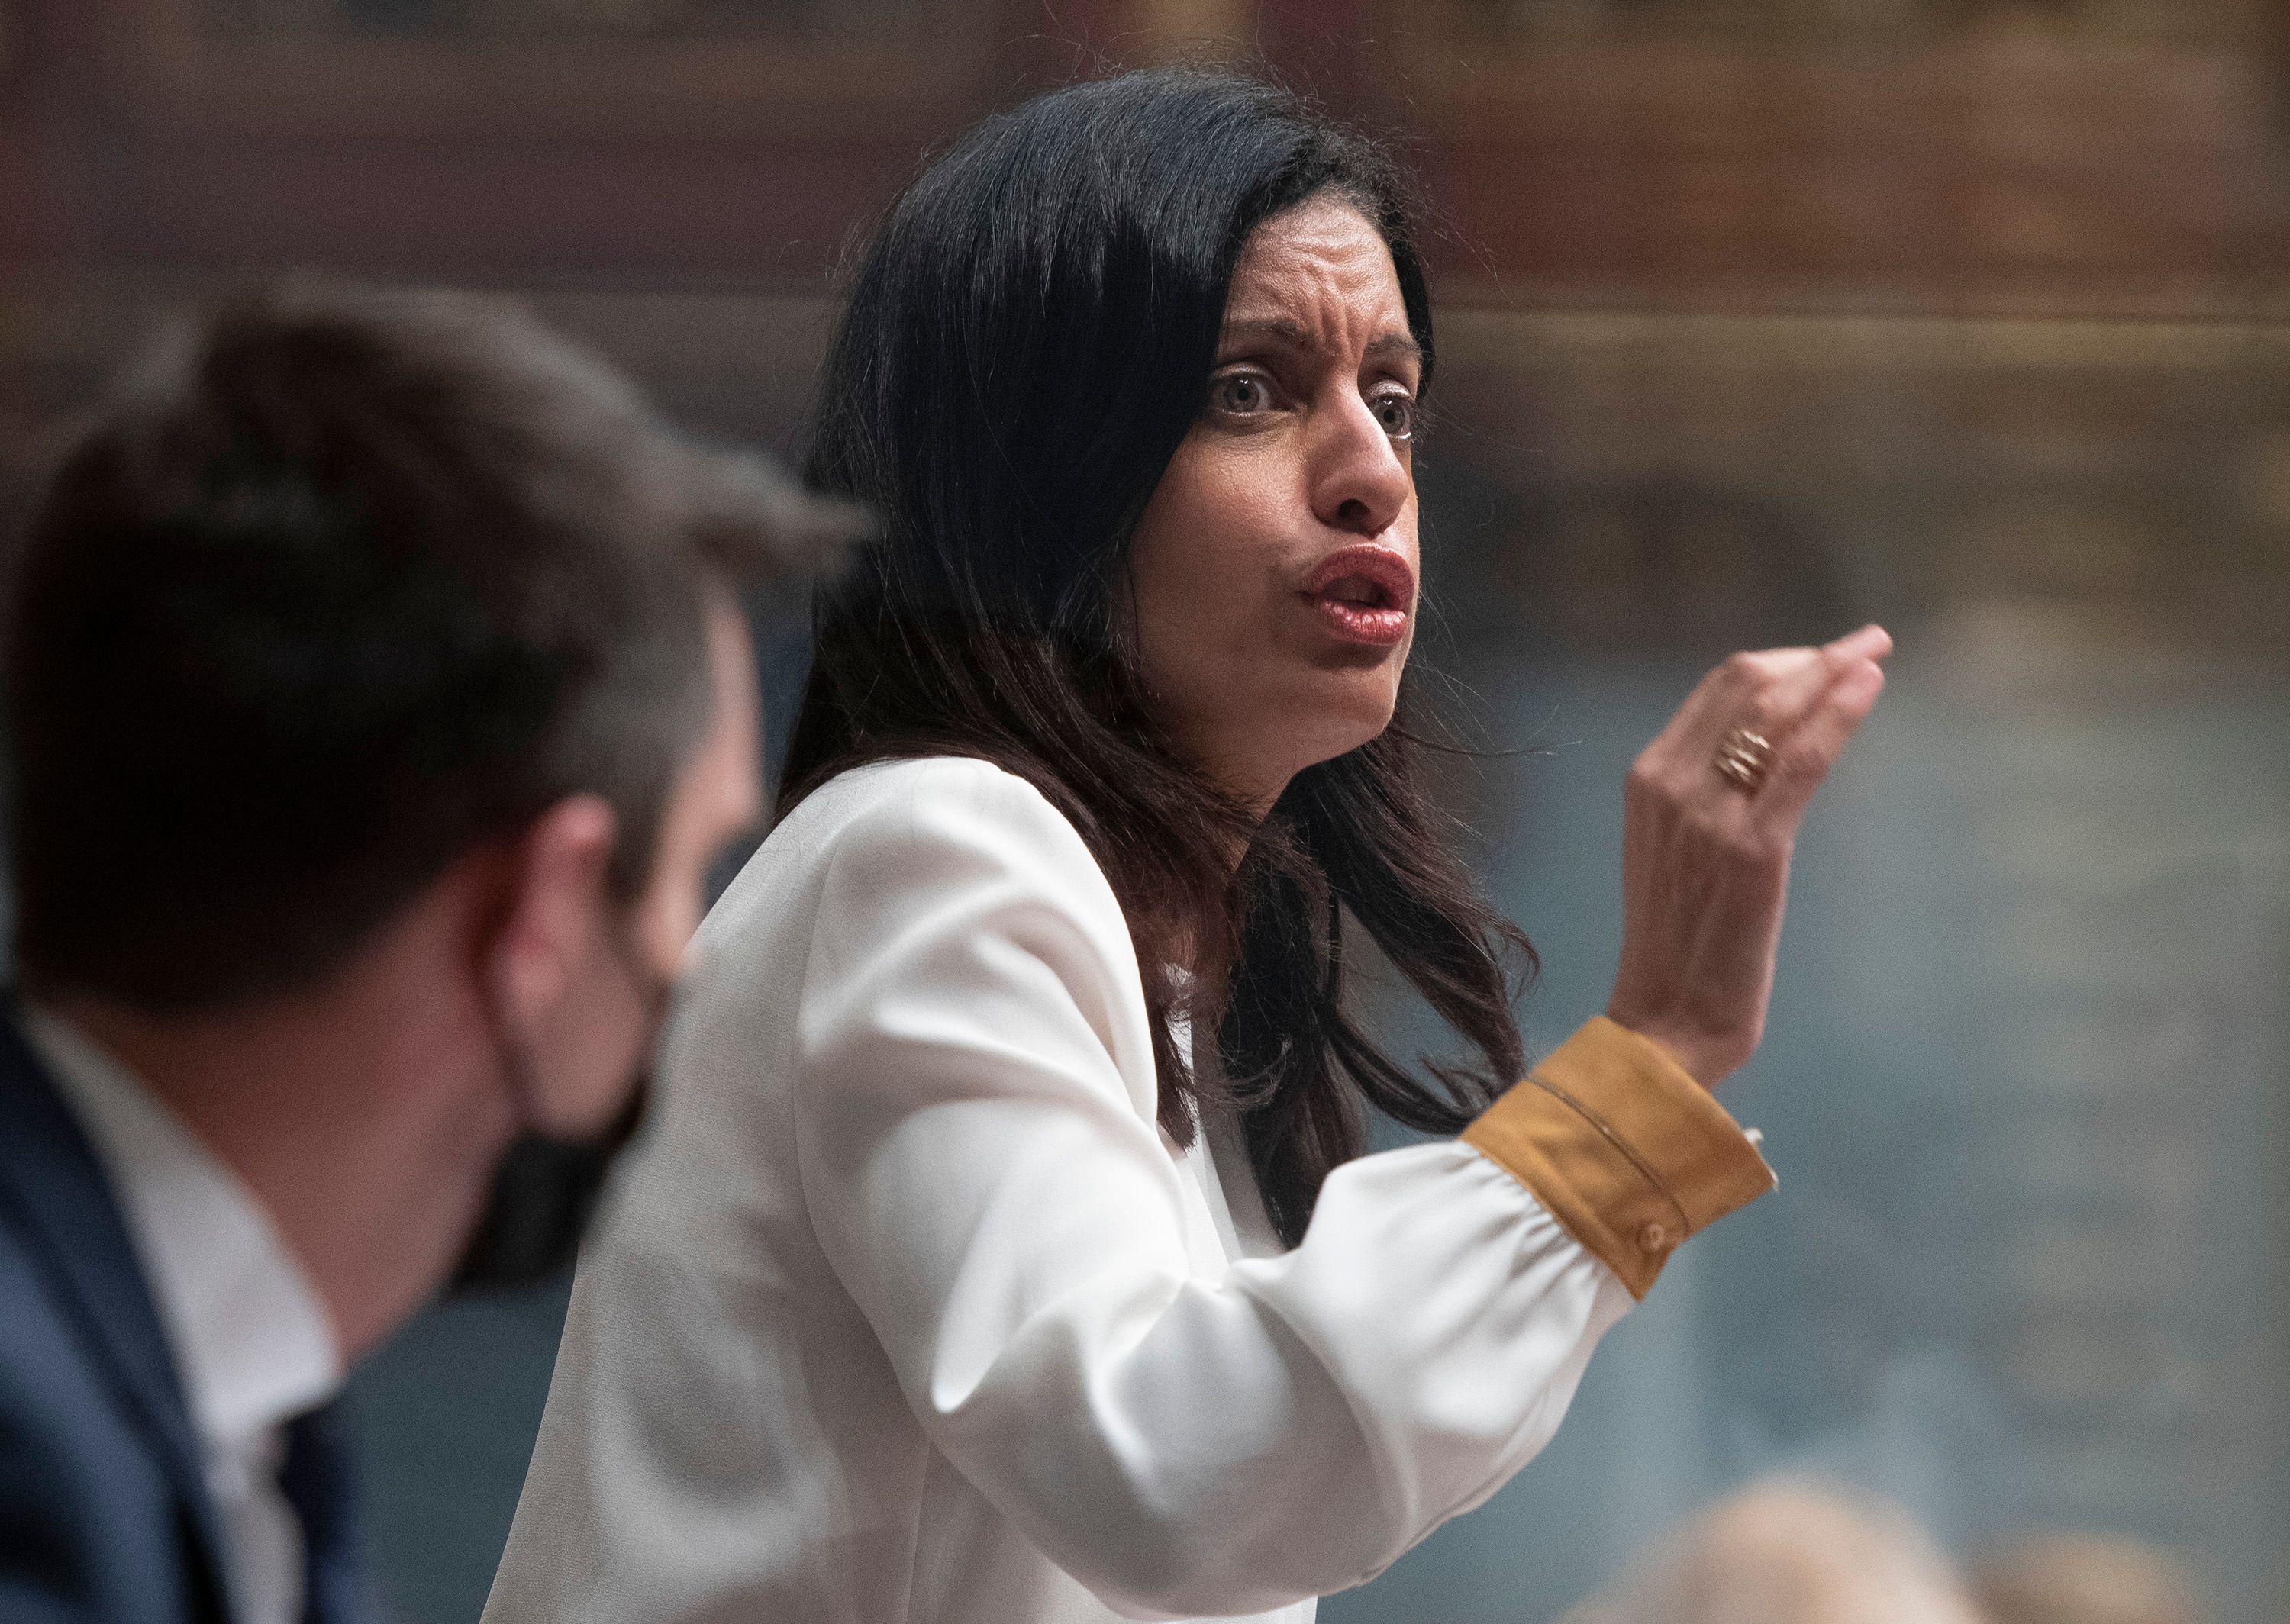 Anglade questions Legault over COVID management, during Question Period on Feb. 8, 2022, at the legislature in Quebec City (Jacques Boissinot/CP)